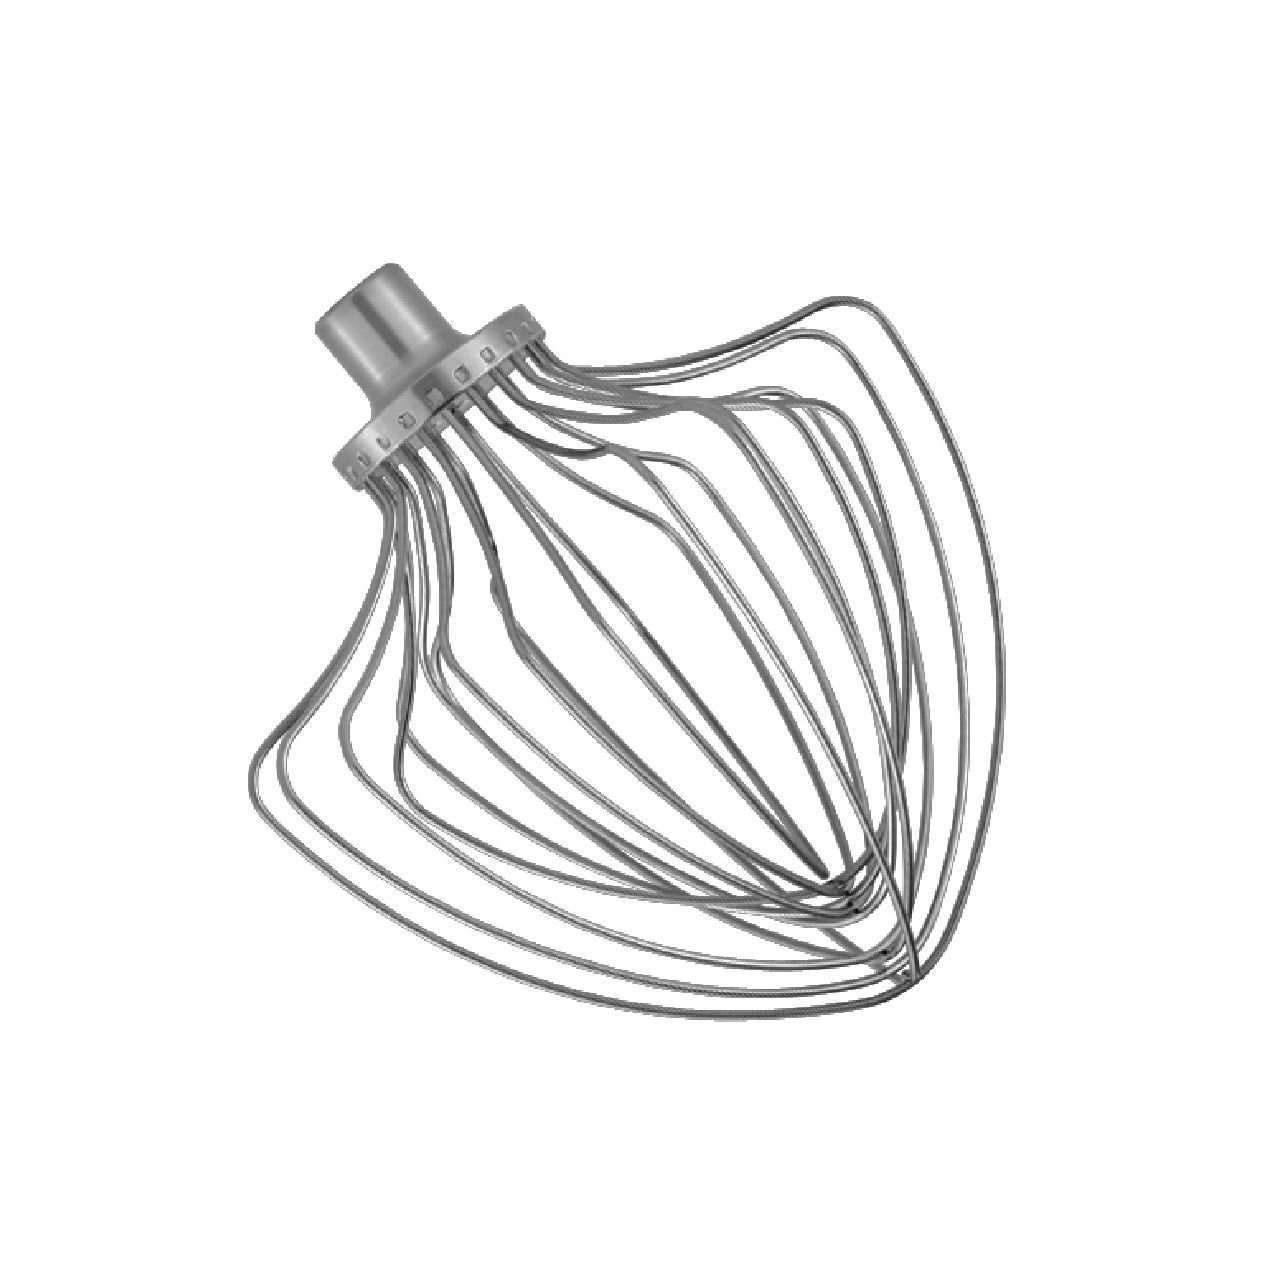 KitchenAid KSMC7QEW Stainless Steel Replacement Wire Whip